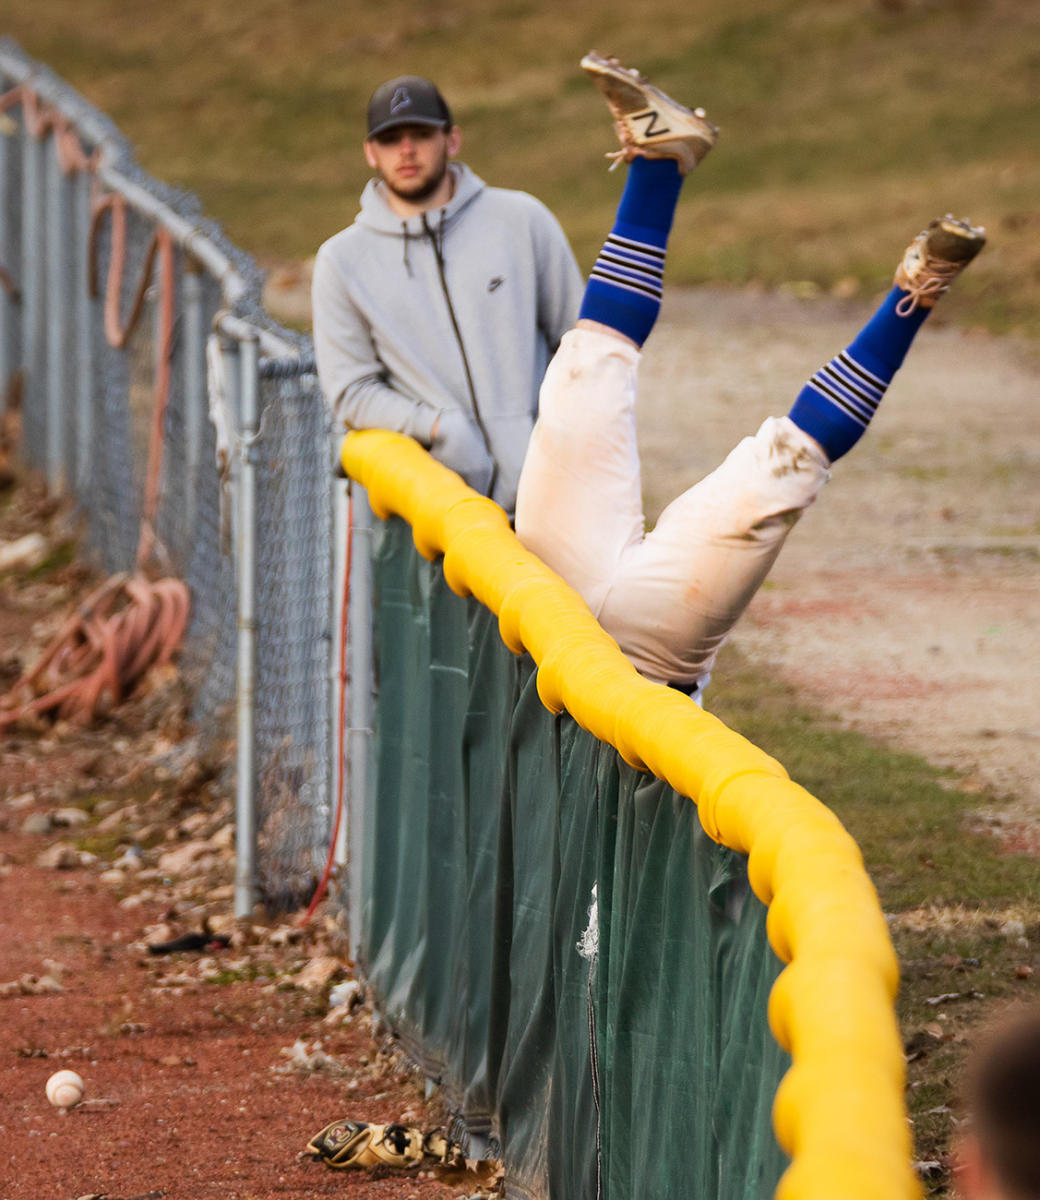  St. Joseph College right fielder flips over the fence while trying to catch a foul ball vs. the University of Southern Maine, in college baseball action in Standish, Maine.  Shot for The Portland Press Herald.